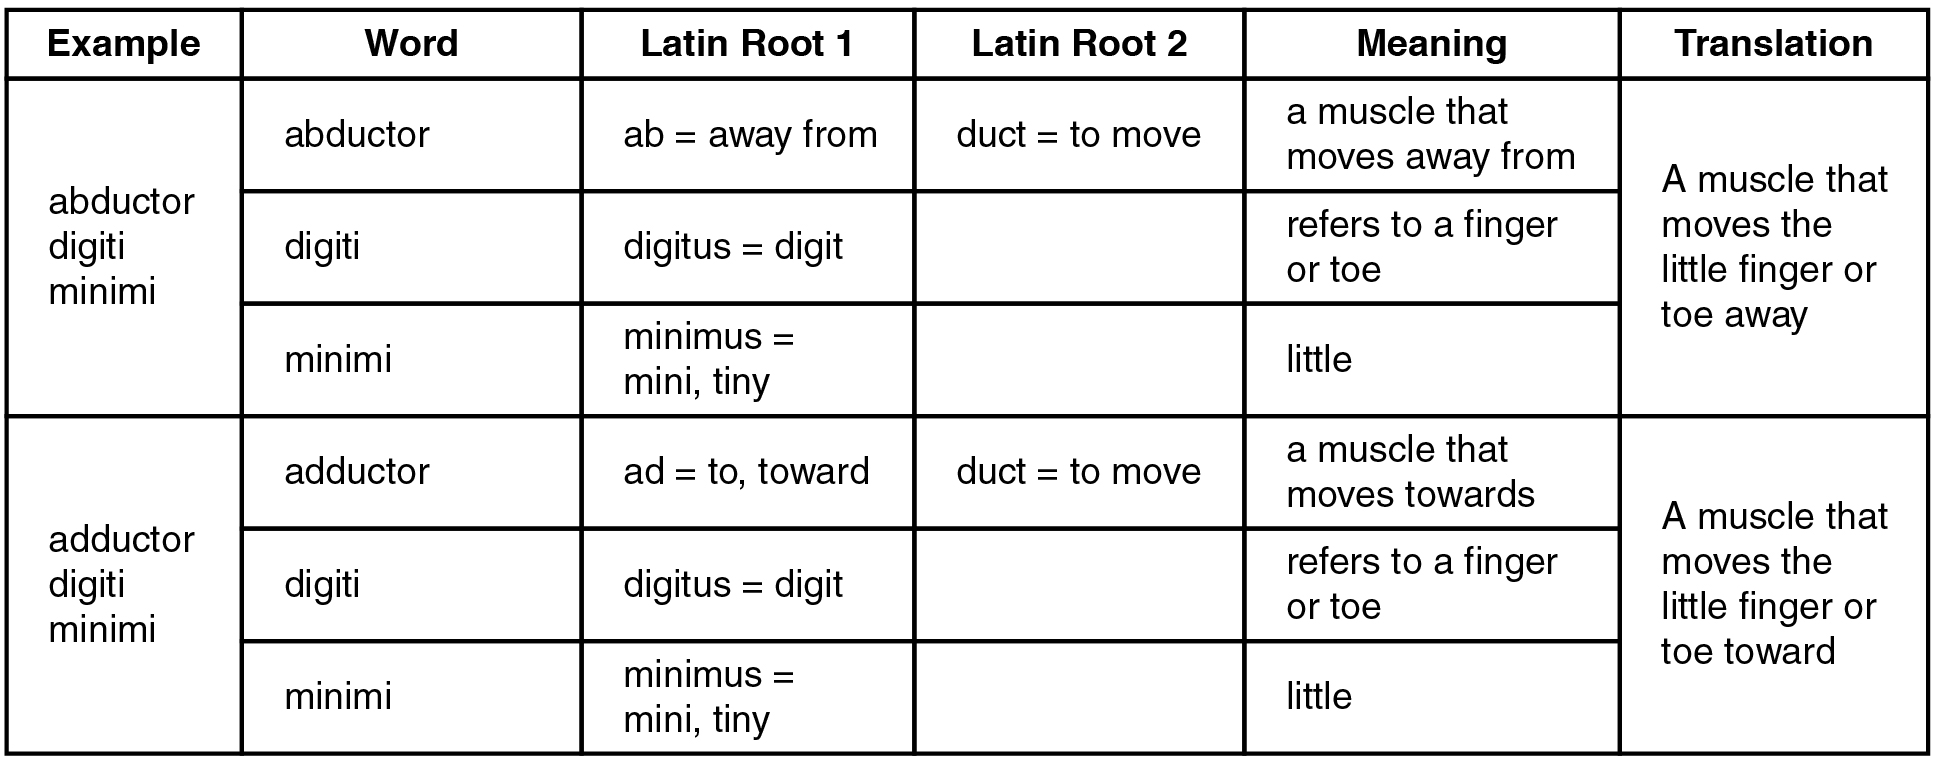 This table shows two examples of muscle names and how to translate them based on their Latin roots. The first row uses abductor digiti minimi as an example. The word abductor comes from the Latin roots ab, which means away from, and duct, which means to move. Therefore an abductor is a muscle that moves away from something. The word digiti comes from the Latin root digititus, which means digit and refers to a finger or toe. The word minimi comes from the Latin root minimus, which means minimum, tiny, or little. Therefore, the abductor digiti minimi is a muscle that moves the little finger or toe away. The second row uses the adductor digiti minimi as an example. The word adductor comes from the Latin root ad, which means to or toward, and duct, which means to move. Therefore an adductor is a muscle that moves toward something. As with the abductor digiti minimi, digiti refers to a finger or toe and minimi refers to something that is little. Therefore the adductor digiti minimi is a muscle that moves the little finger or toe forward.